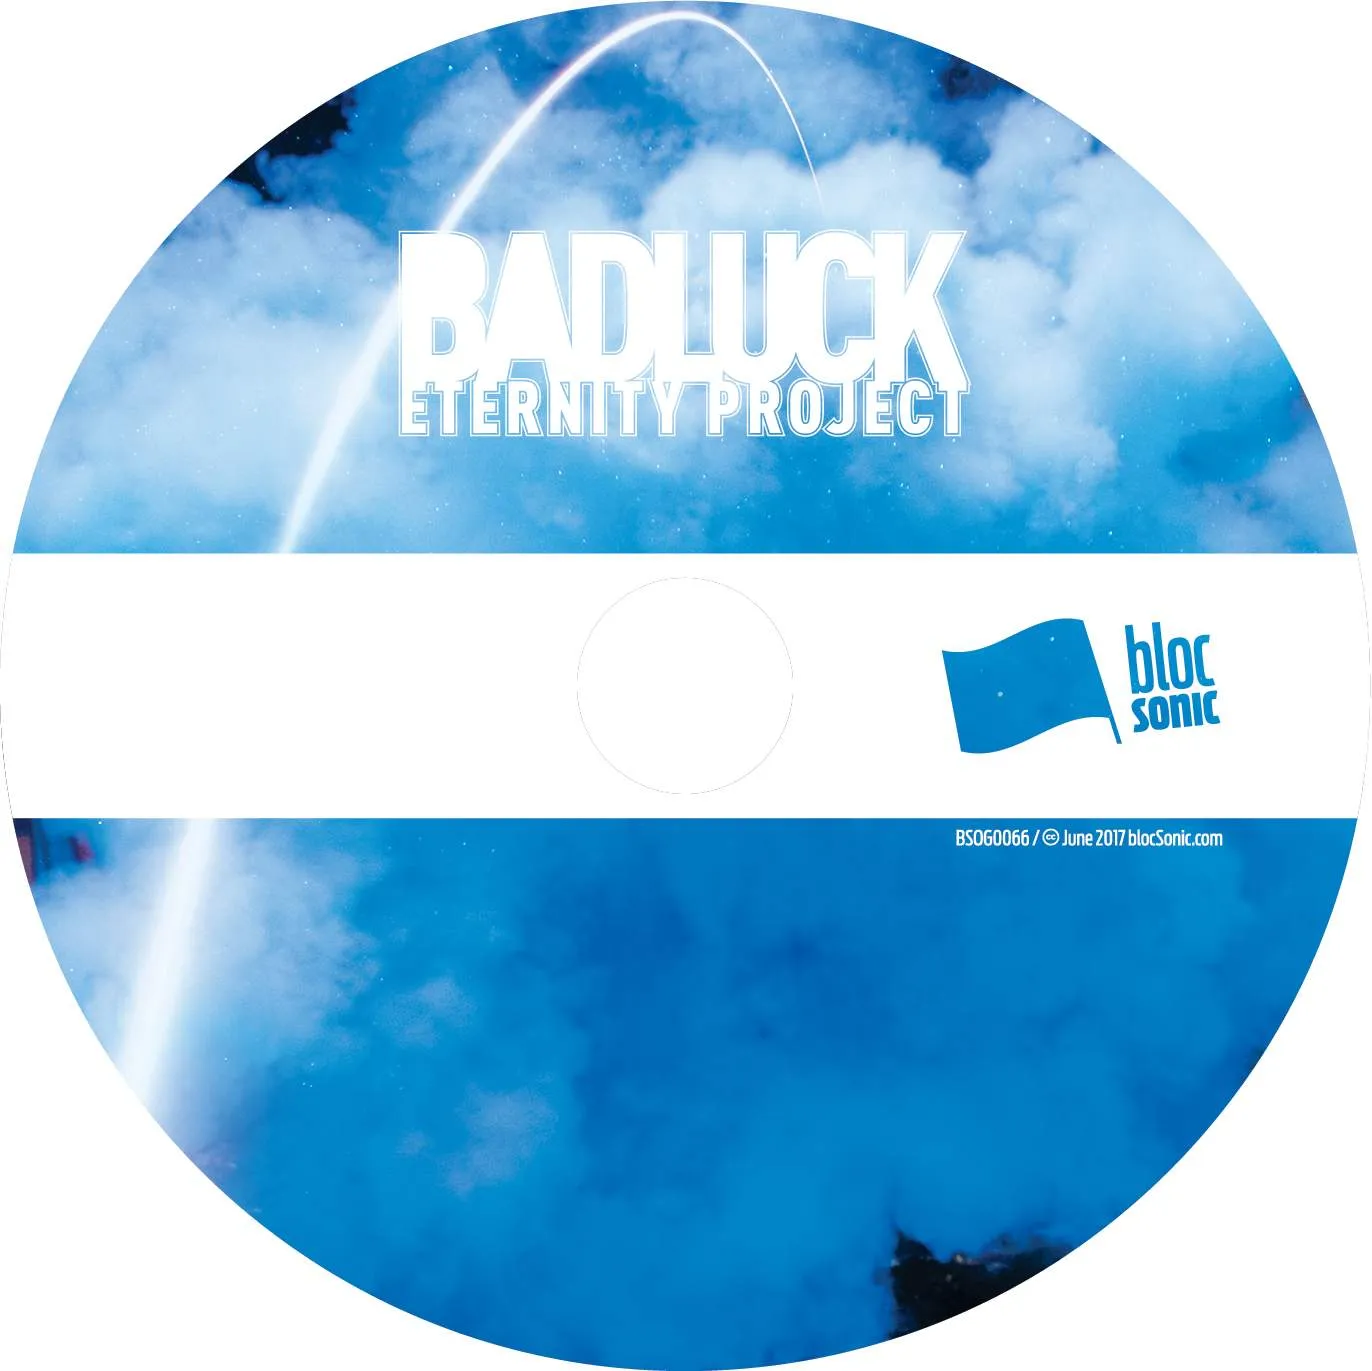 Album disc for “Eternity Project” by BADLUCK